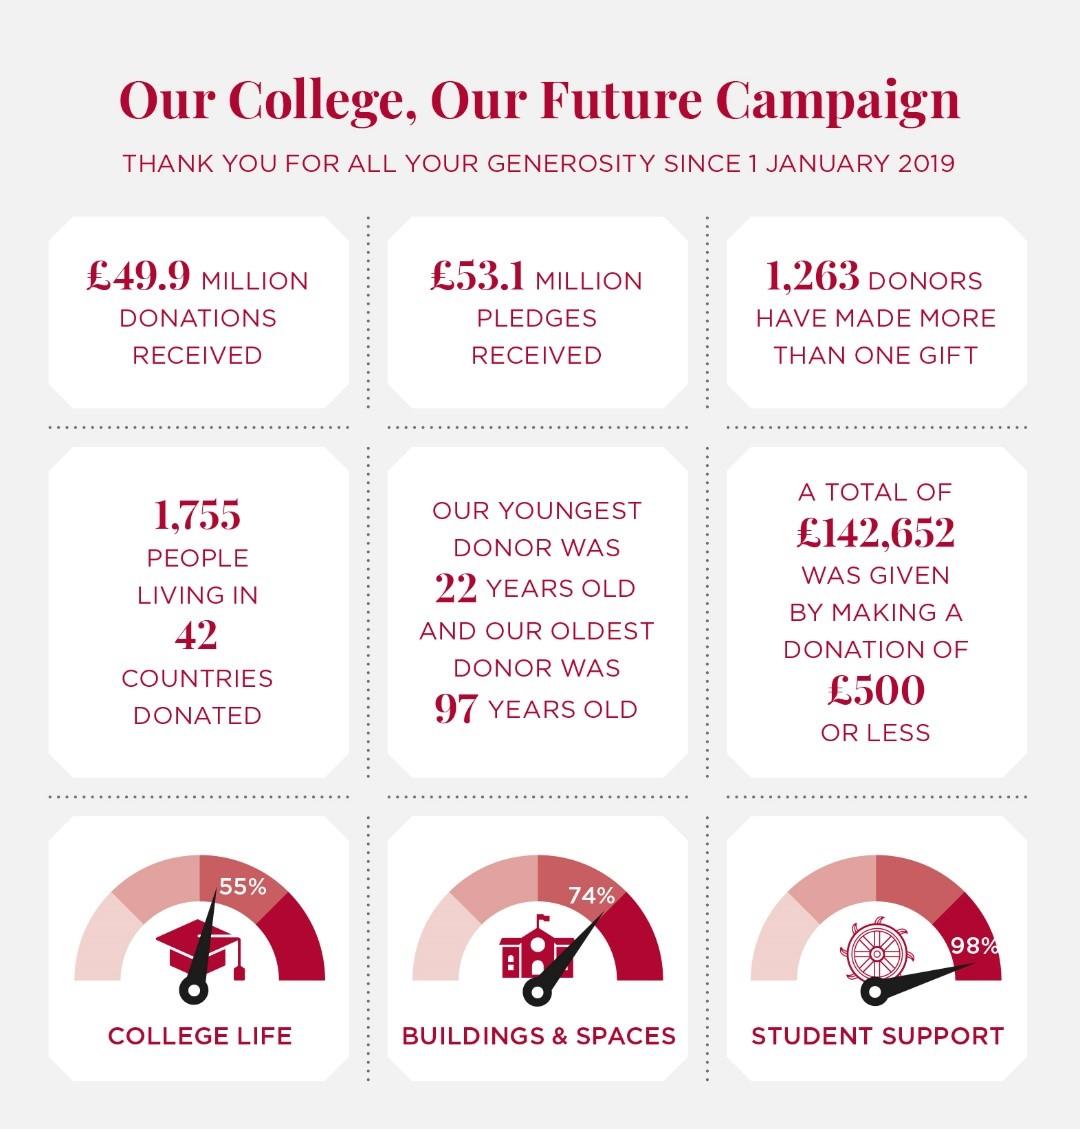 Infographic explaining progress against the 'Our College, Our Future' campaign goals